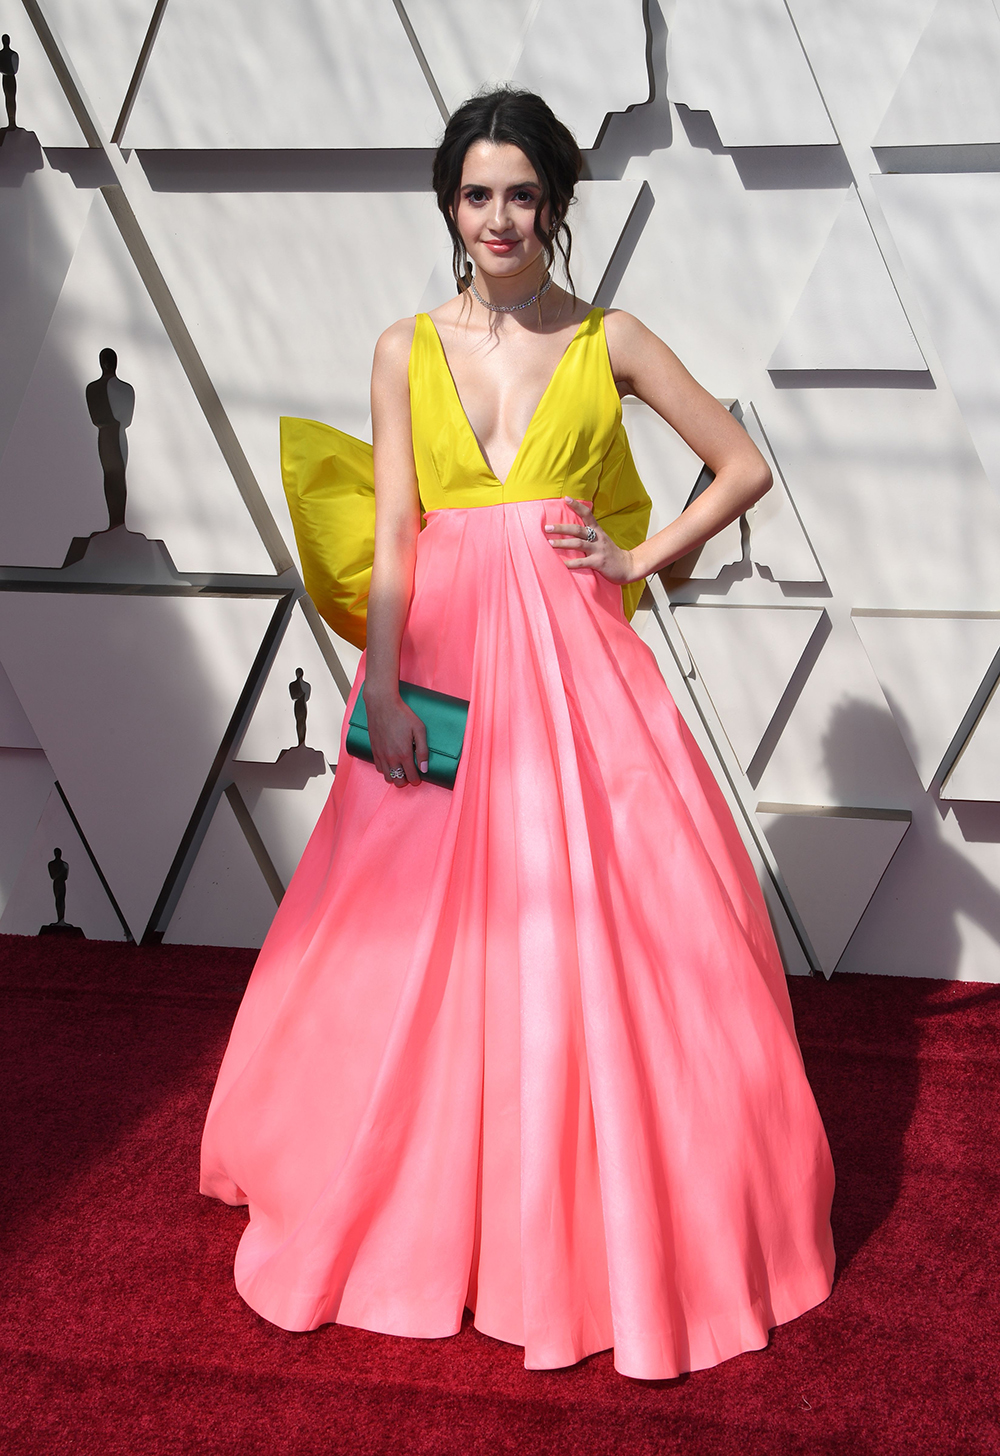 Actress Laura Marano arrives for the 91st Annual Academy Awards at the Dolby Theatre in Hollywood, California on February 24, 2019. (Photo by Mark RALSTON / AFP) (Photo credit should read MARK RALSTON/AFP/Getty Images)